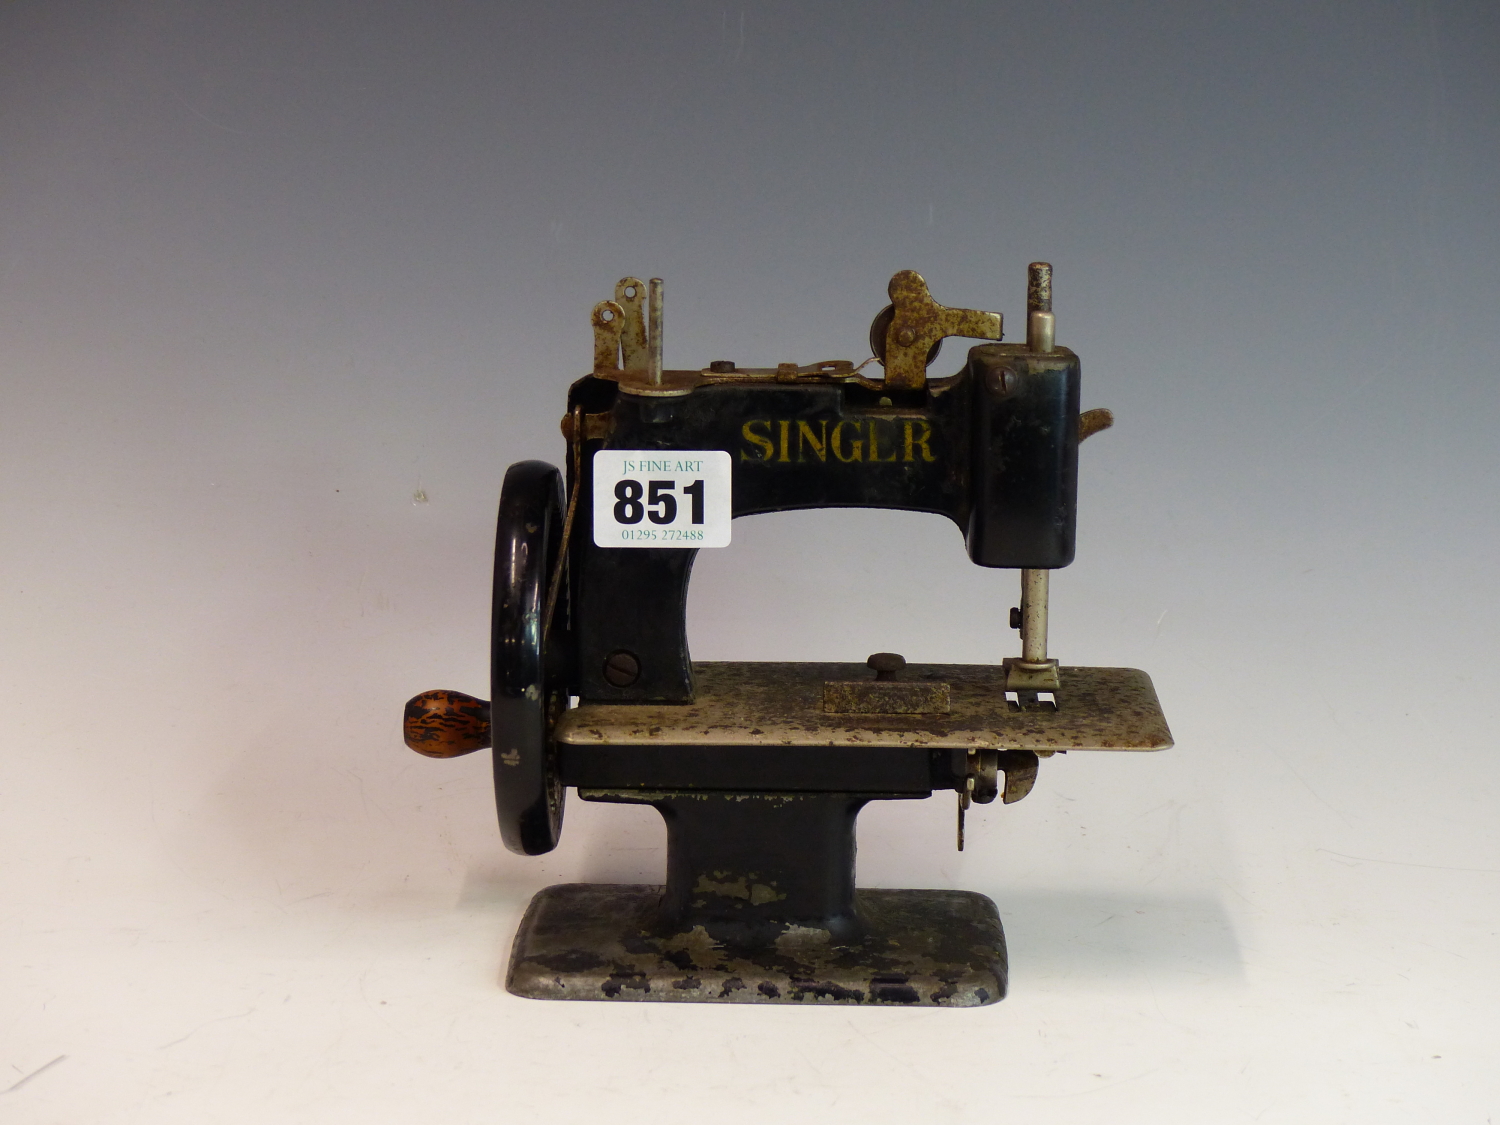 A VINTAGE SINGER MINIATURE SEWING MACHINE WITH ALLOY BODY. - Image 2 of 4